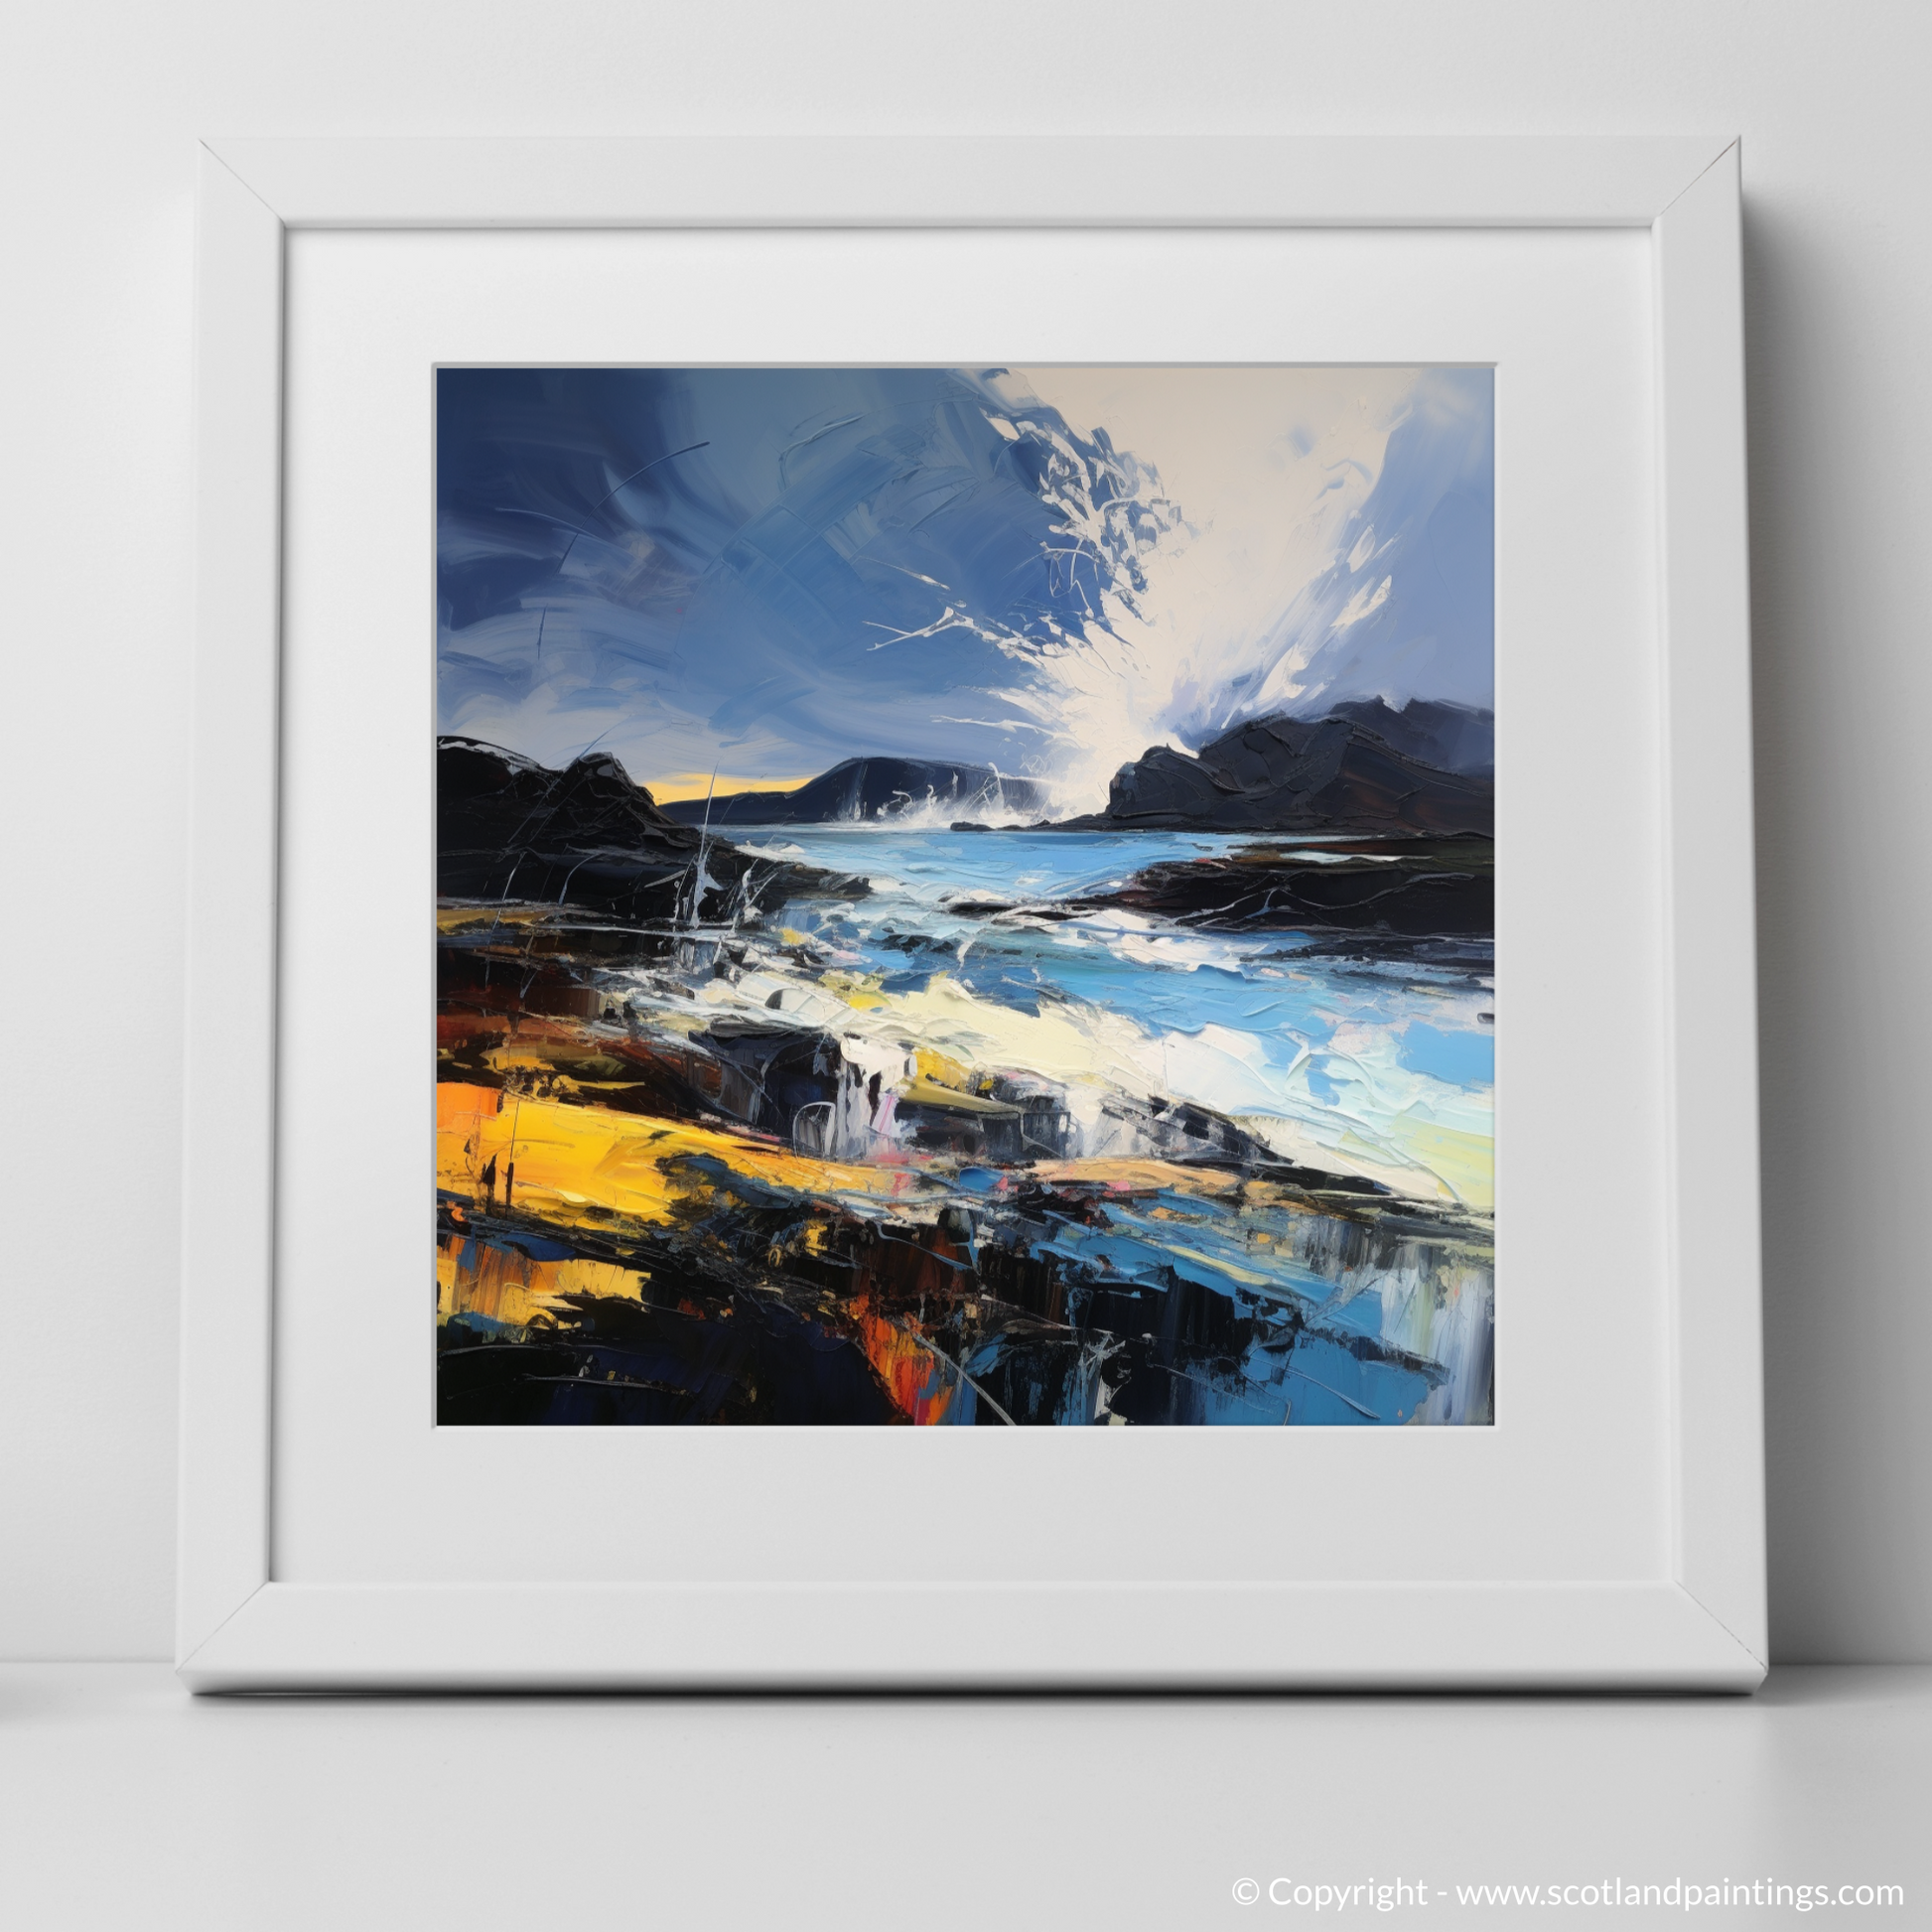 Art Print of Ardalanish Bay with a stormy sky with a white frame